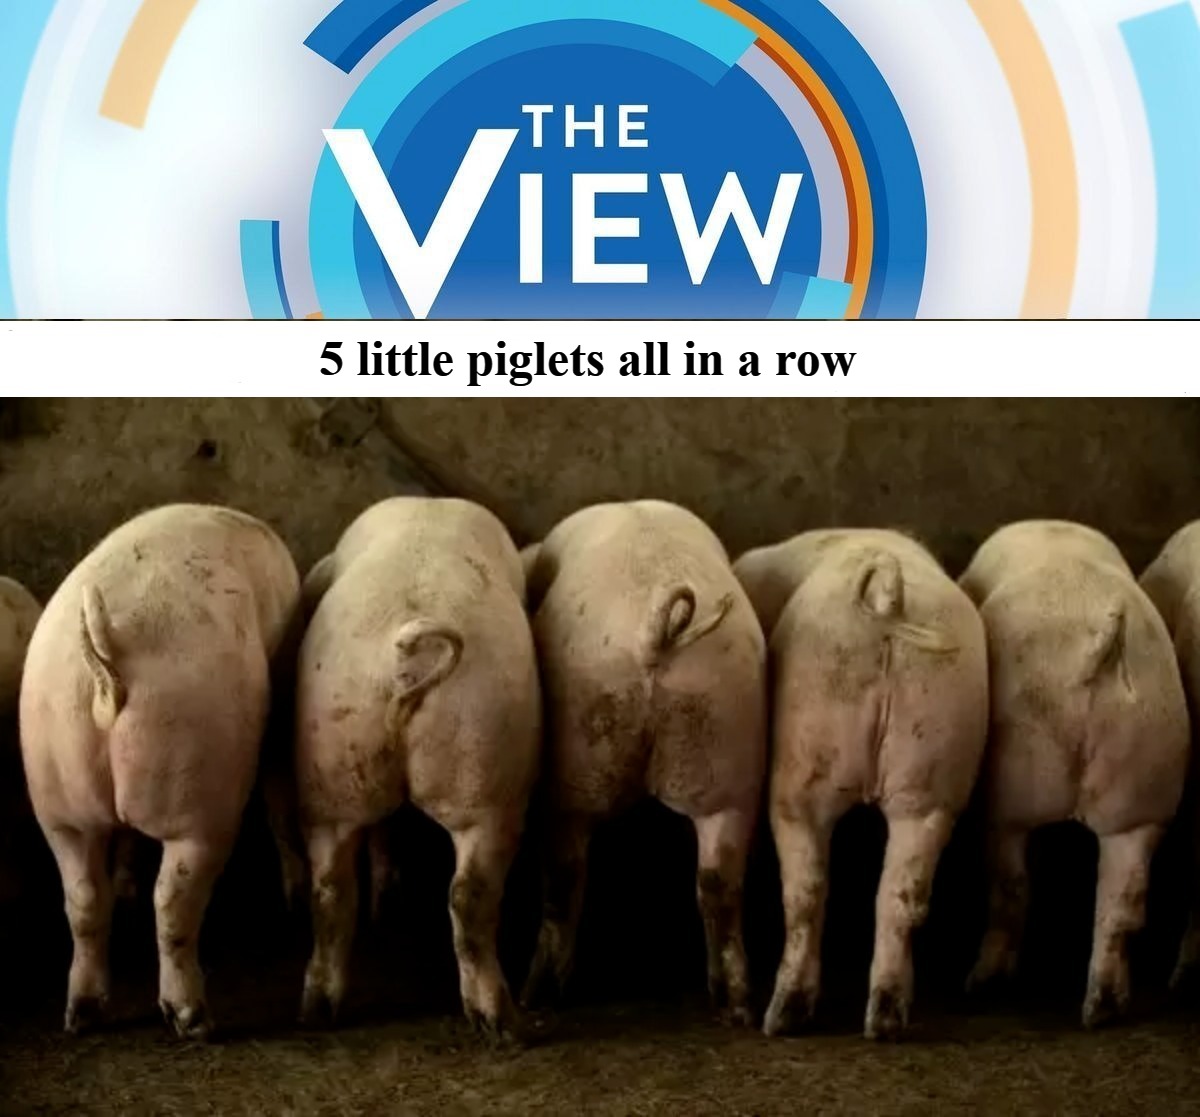 5 little piglets all in a row. | 5 little piglets all in a row | image tagged in the view,piglet,swine,whoopi goldberg | made w/ Imgflip meme maker